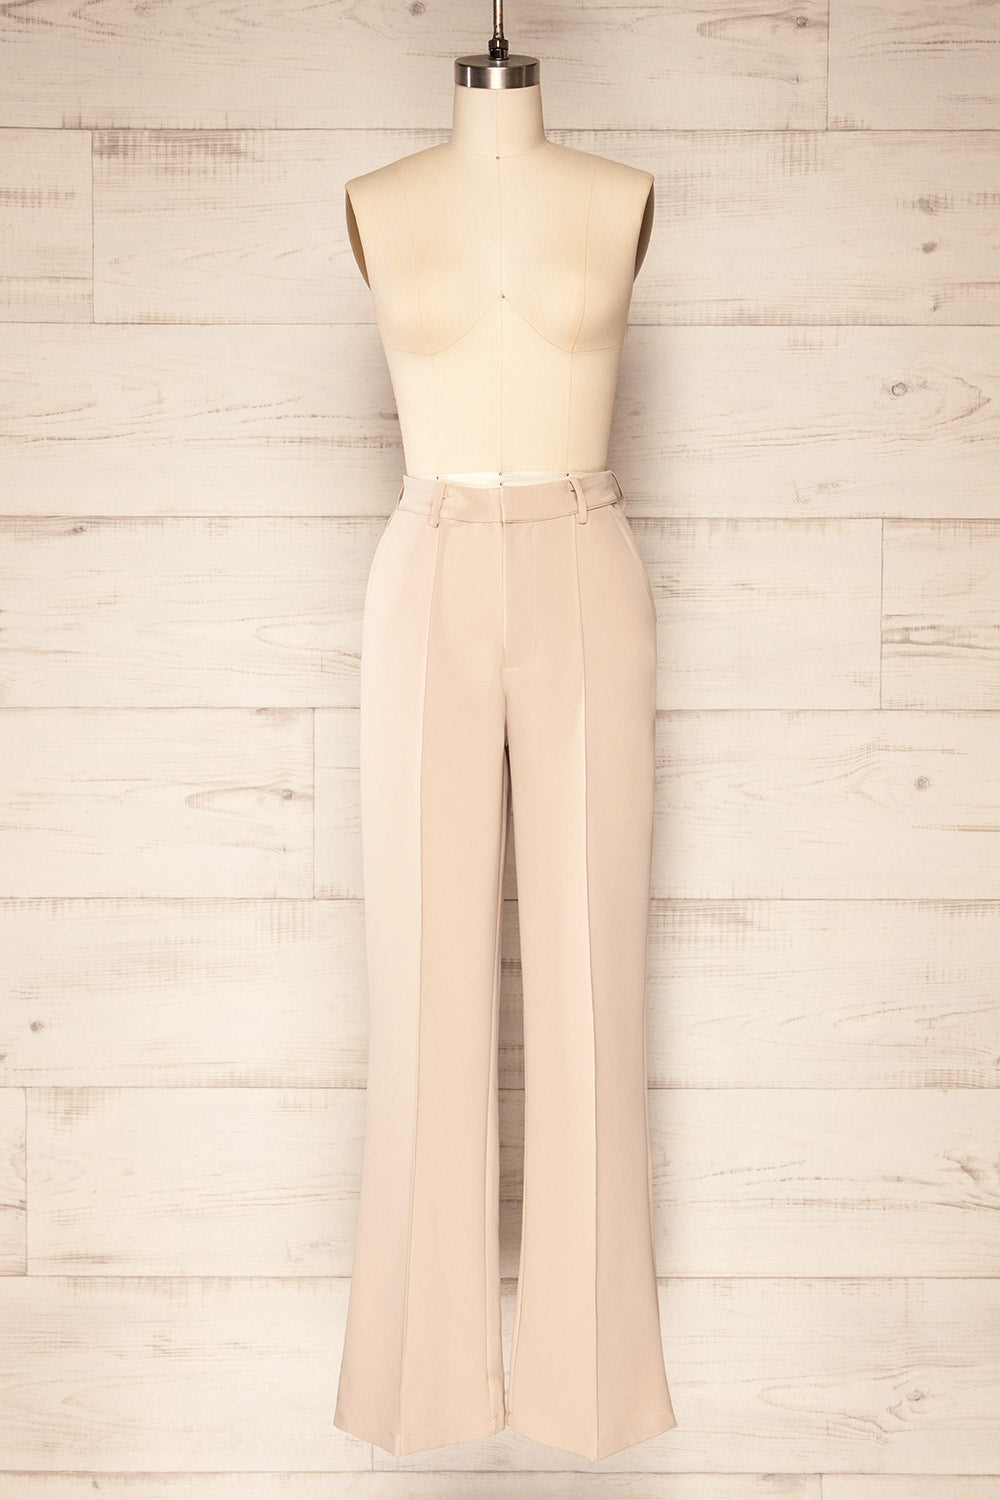 The Taron High Waist Wide Leg Pants in Pear • Impressions Online Boutique